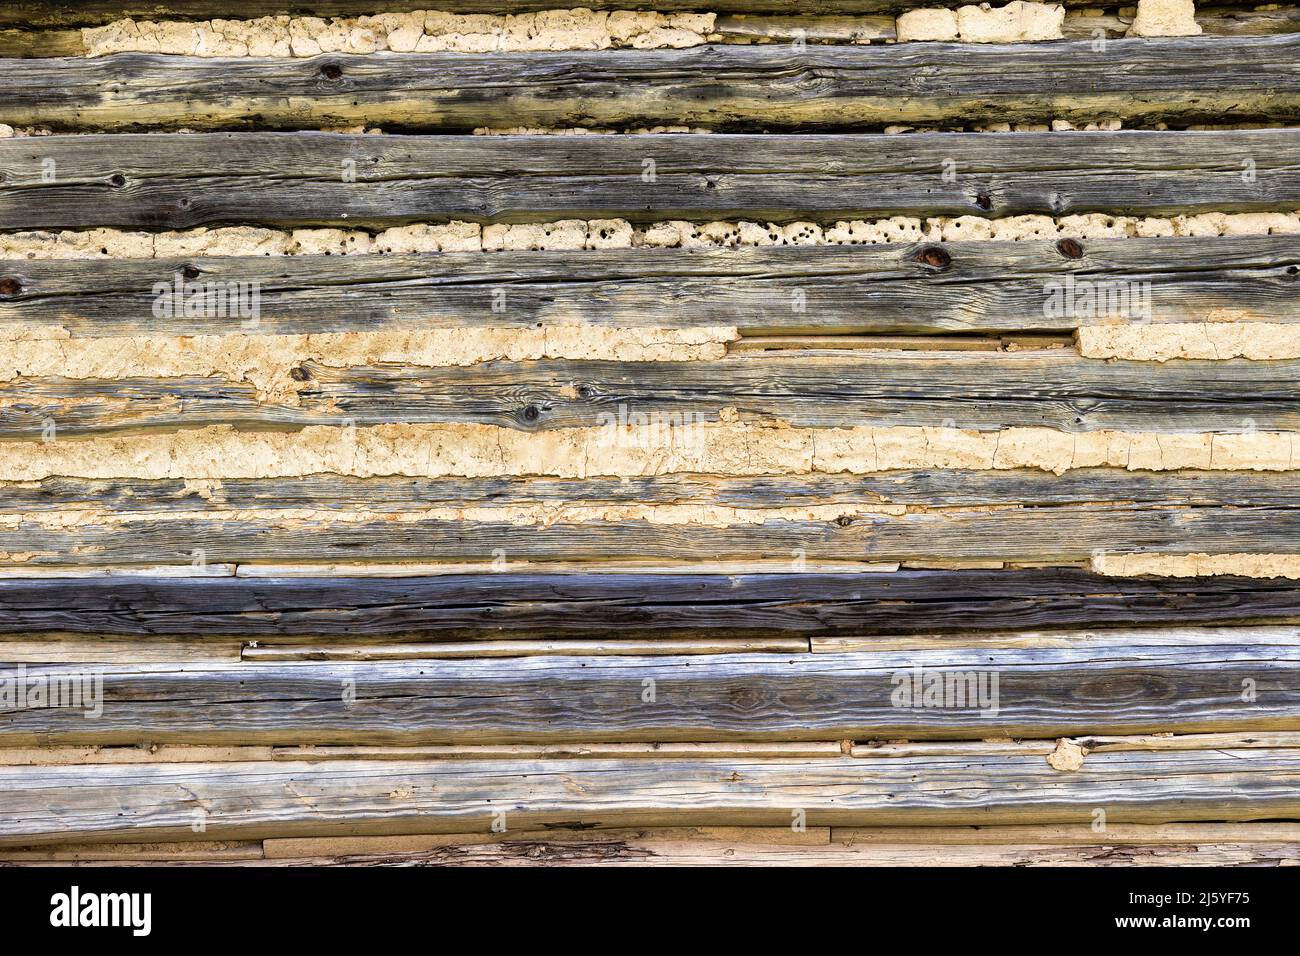 Background close up of a log wall of an exterior building. Stock Photo